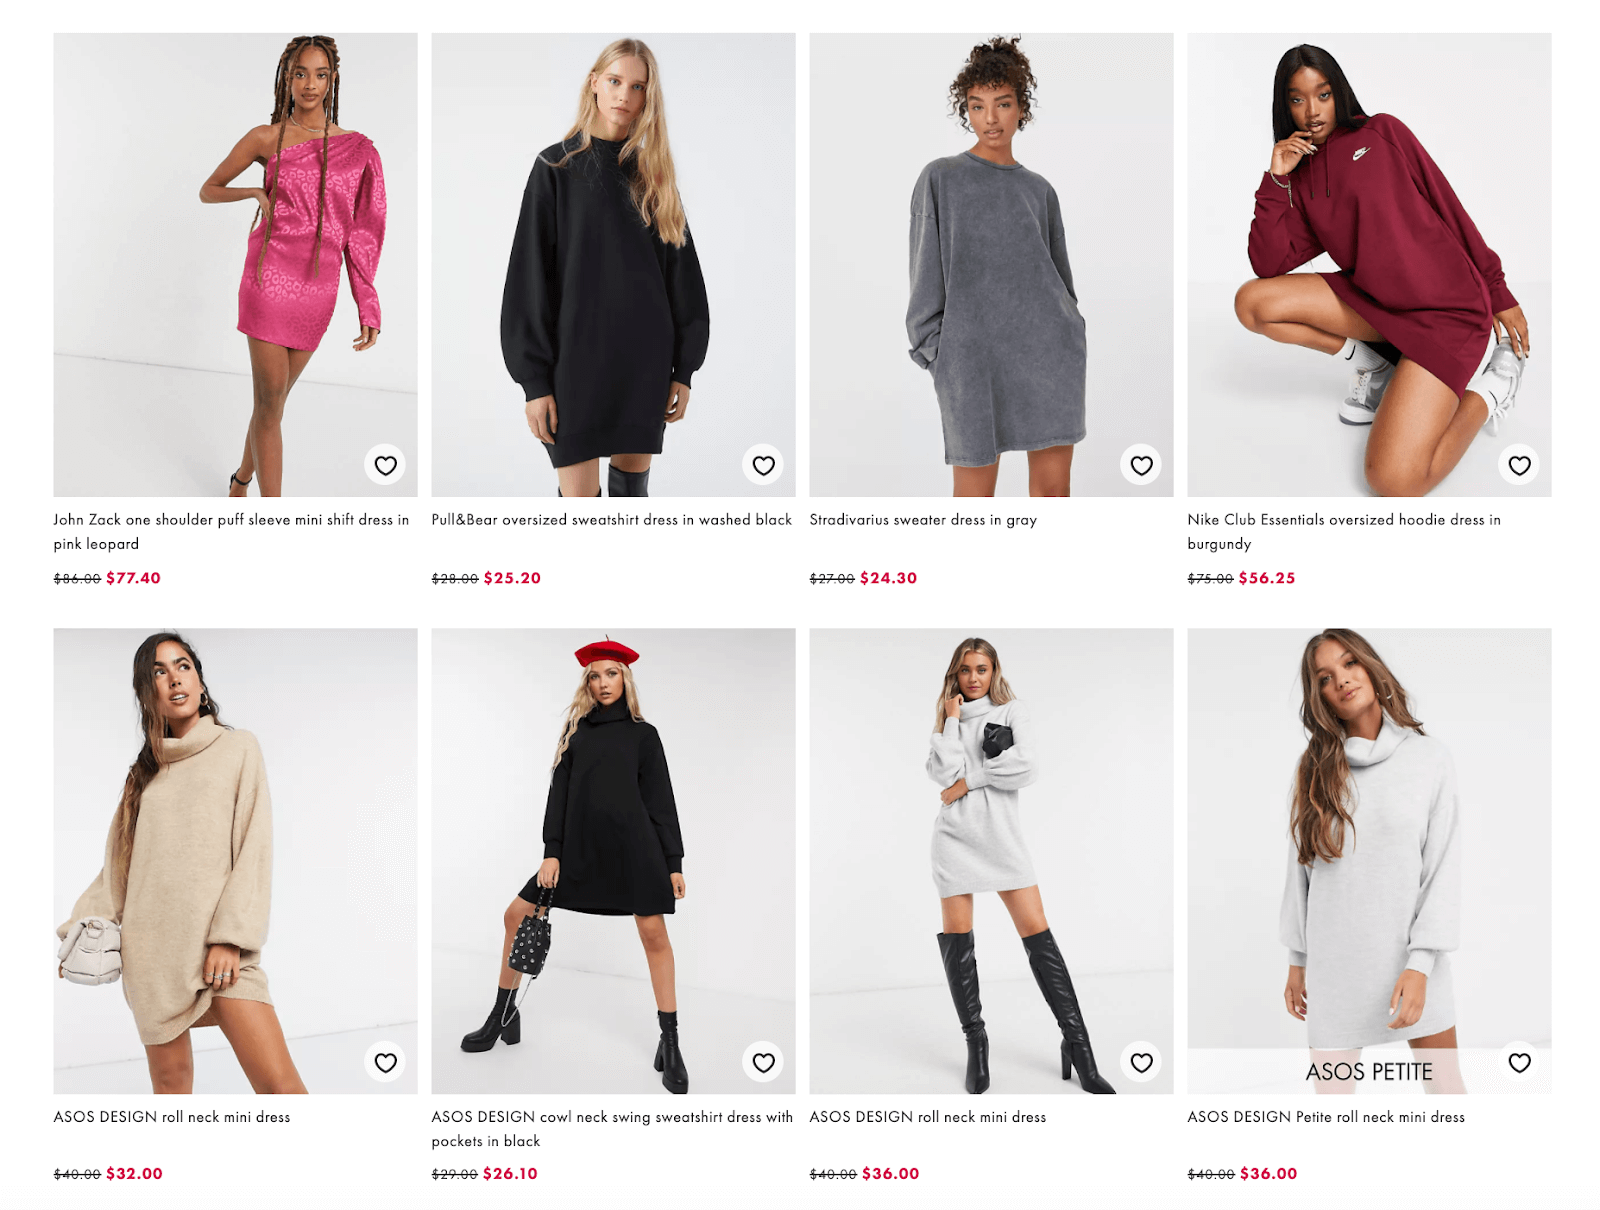 Asos product photography